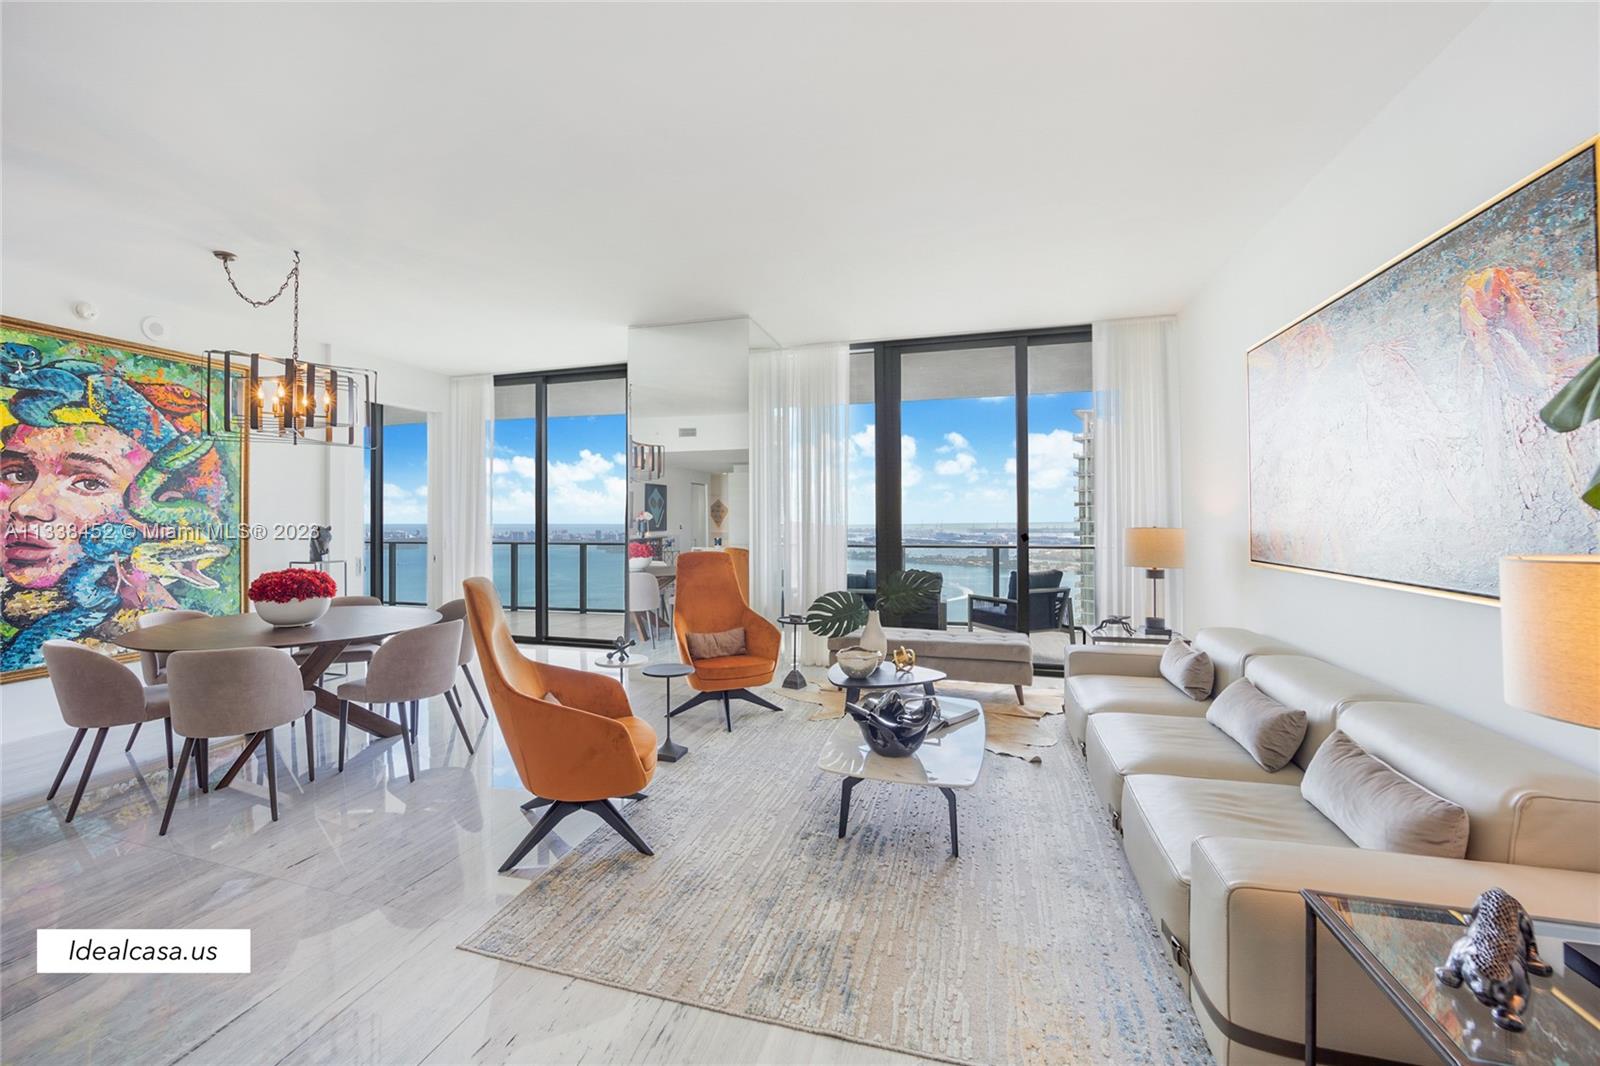 Breathtaking Ocean and Intercostal Views, Paraiso Bay "PH 5002" in the heart of Edgewater, 1,808 SqFt. Walking distance to Wynwood, Art District/Design District/Midtown. 3 Bedrooms 3 Baths, Tiger Marble  flooring, 10 ft. ceilings and floor-to-ceiling windows. Private elevator lobby, expansive balcony, open kitchen, Bosch & Sub-Zero appliances. Laundry. Master suite, huge walk-in closet and beautifully appointed master bath. Enjoy the quintessential Miami lifestyle in this new, world-class building. the best amenities in Miami,  a 100 ft diameter pool, art gym, spa, sauna, steam room, private screening room, wine cellar and tasting salon, cigar lounge, outdoor grill, game room, multimedia facilities, bowling alley, tennis courts, Bayfront Beach club with famed Amara Restaurant.